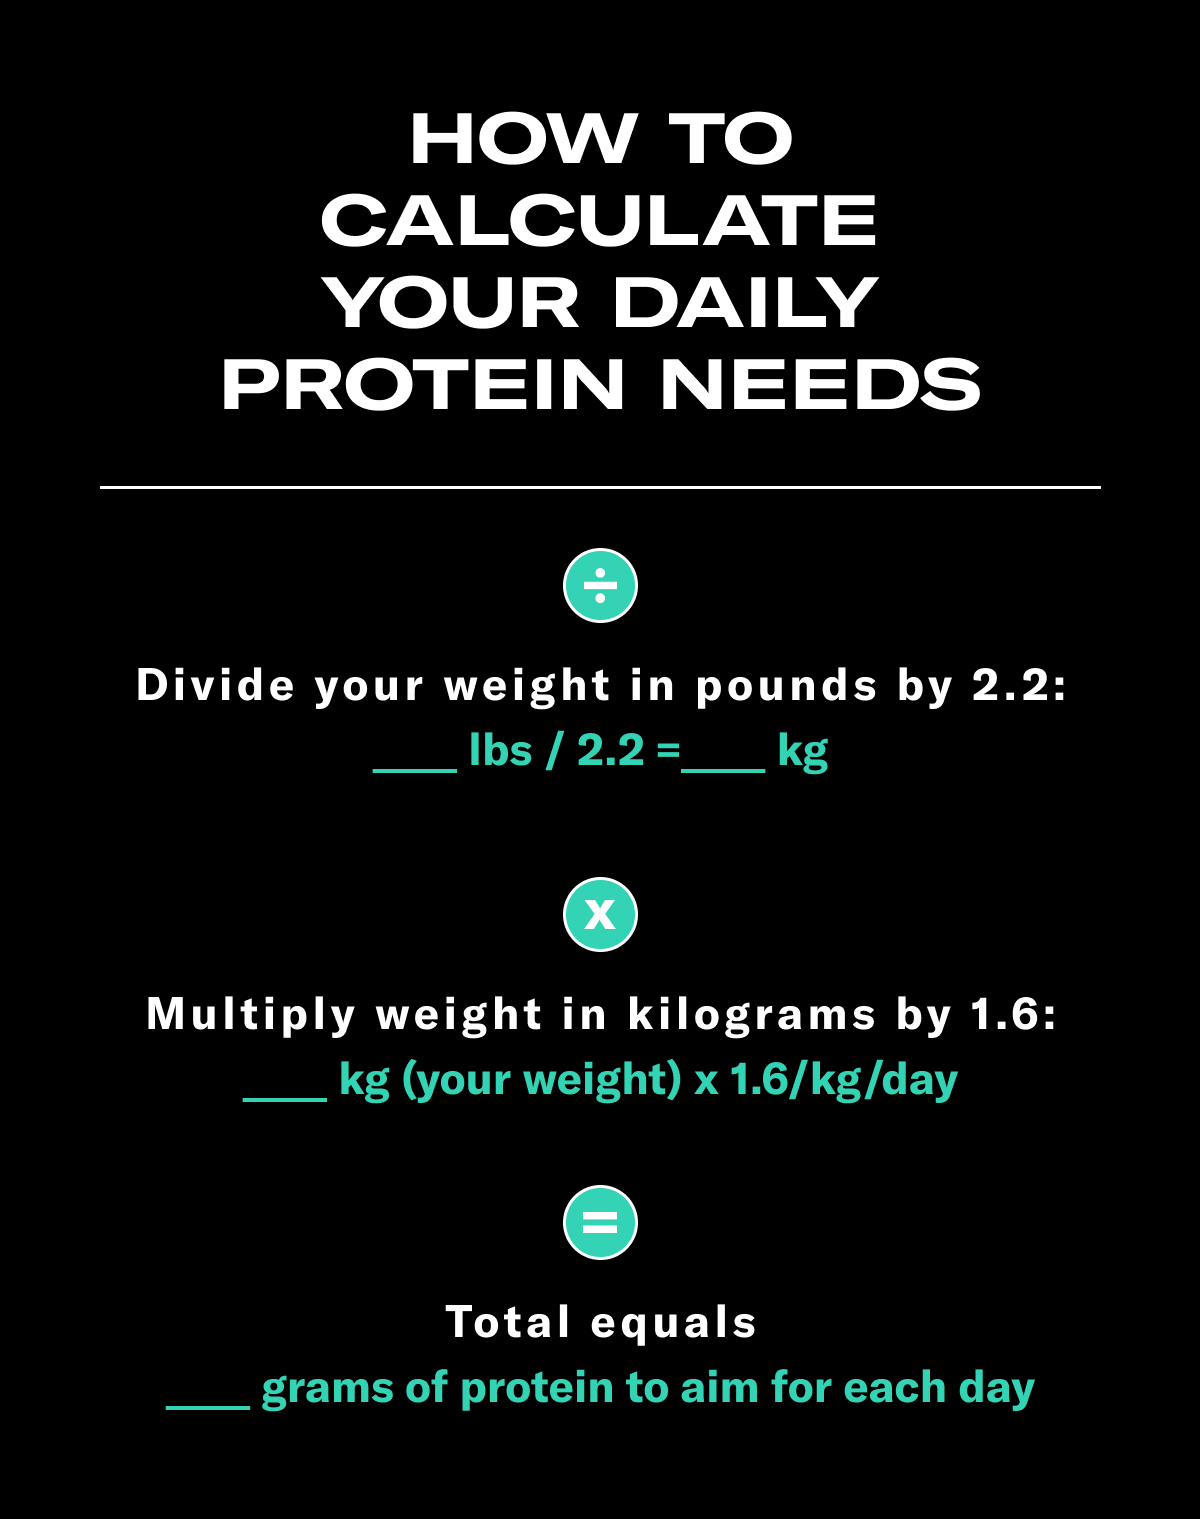 Graphic that outlines the equation you need to calculate your daily protein needs: divide weight in pounds by 2.2 to get kilograms. Multiply weight in kilograms by 1.6. The total equals the protein you should aim for. 